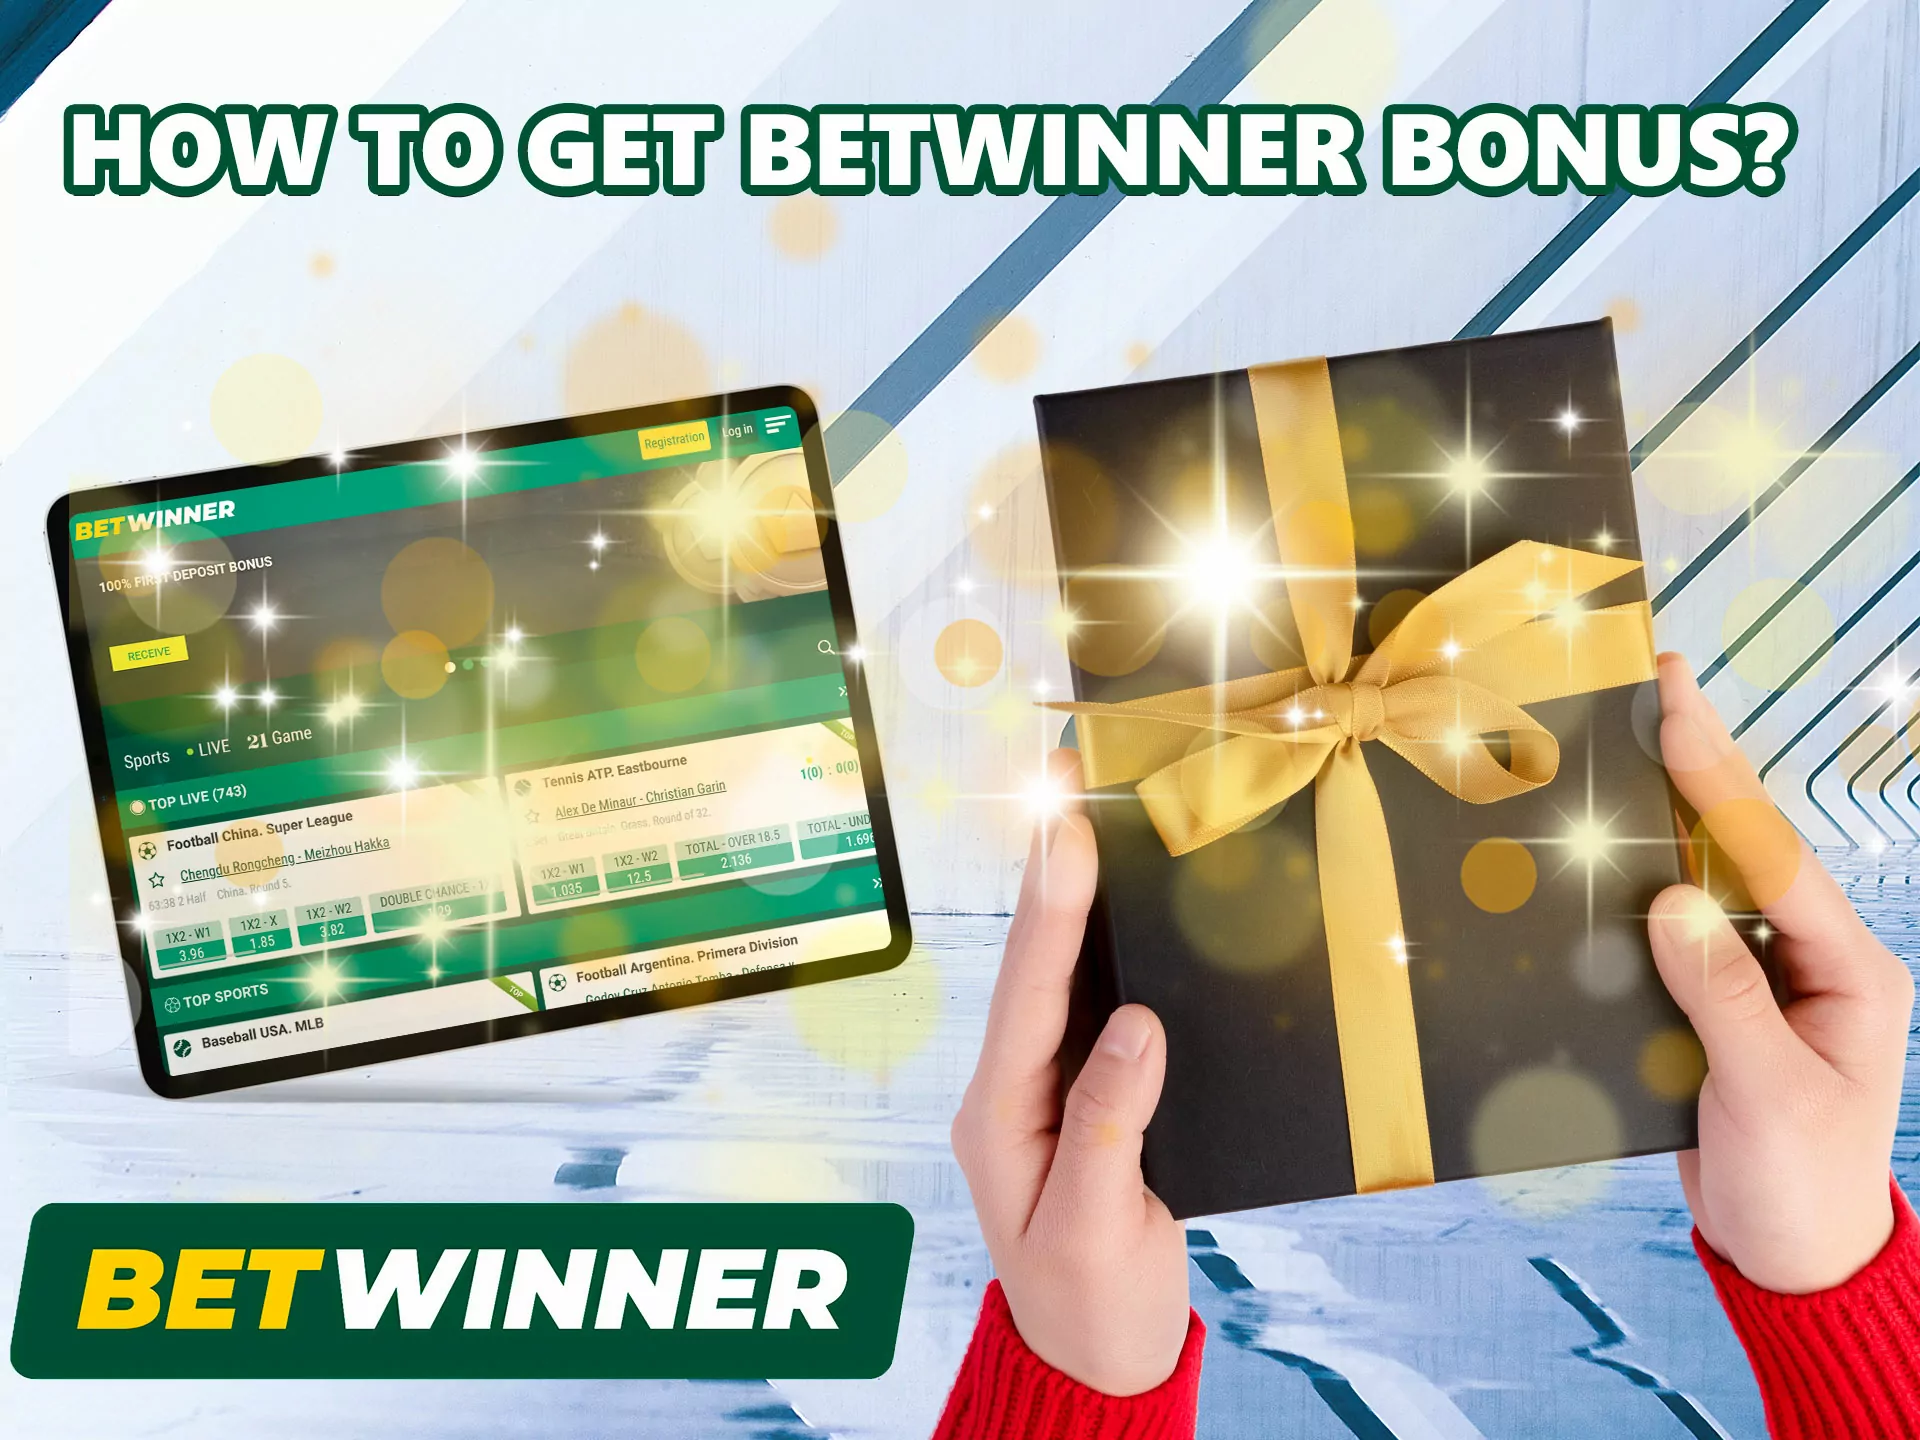 It is very easy to get a nice gift from Betwinner, just follow our simple guide.